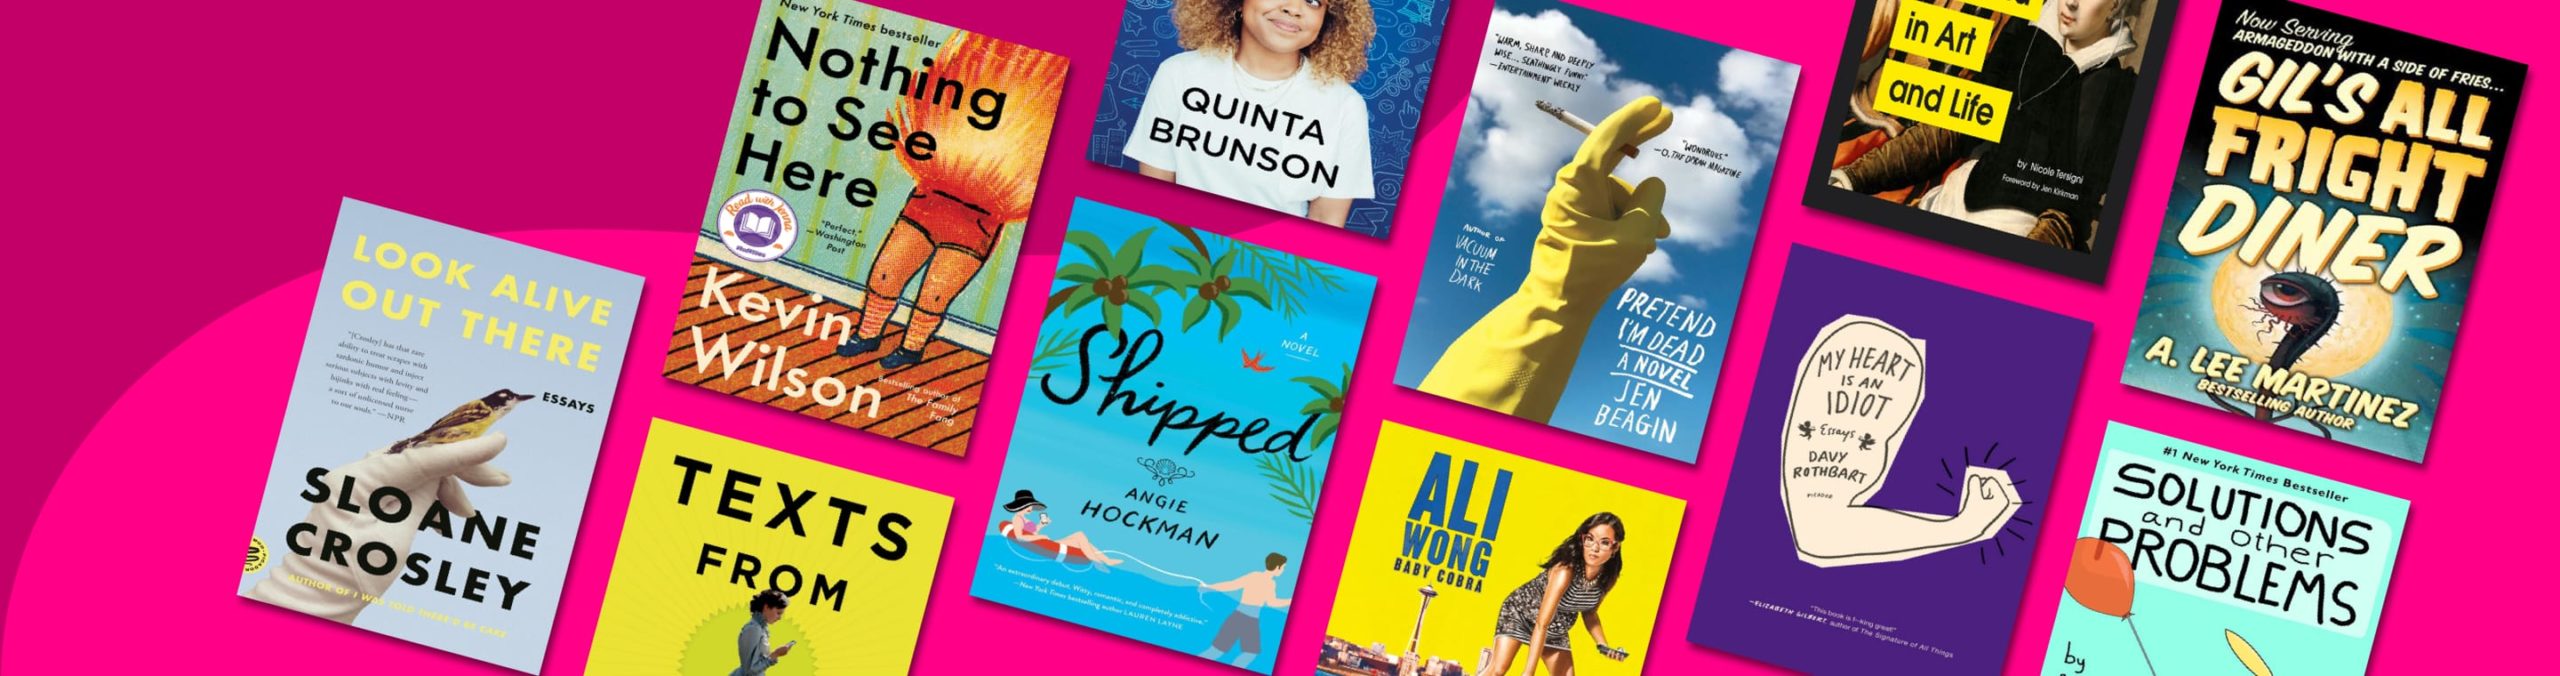 11 laugh-out-loud books to beat the winter blues